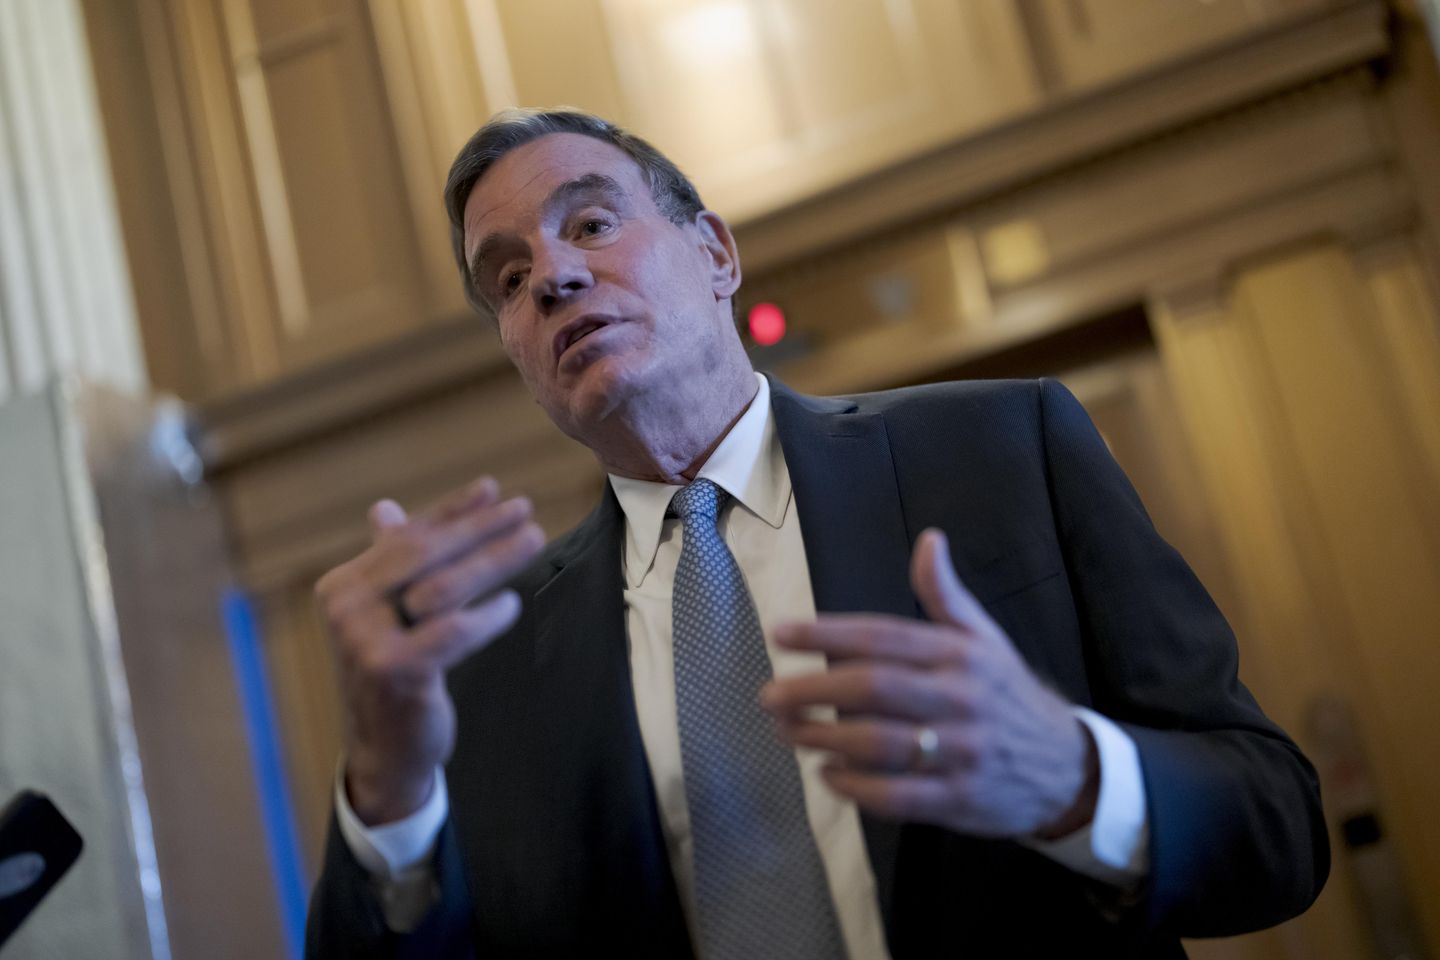 Sen. Mark Warner defends campaign donations from failed bank, while stocks rebound